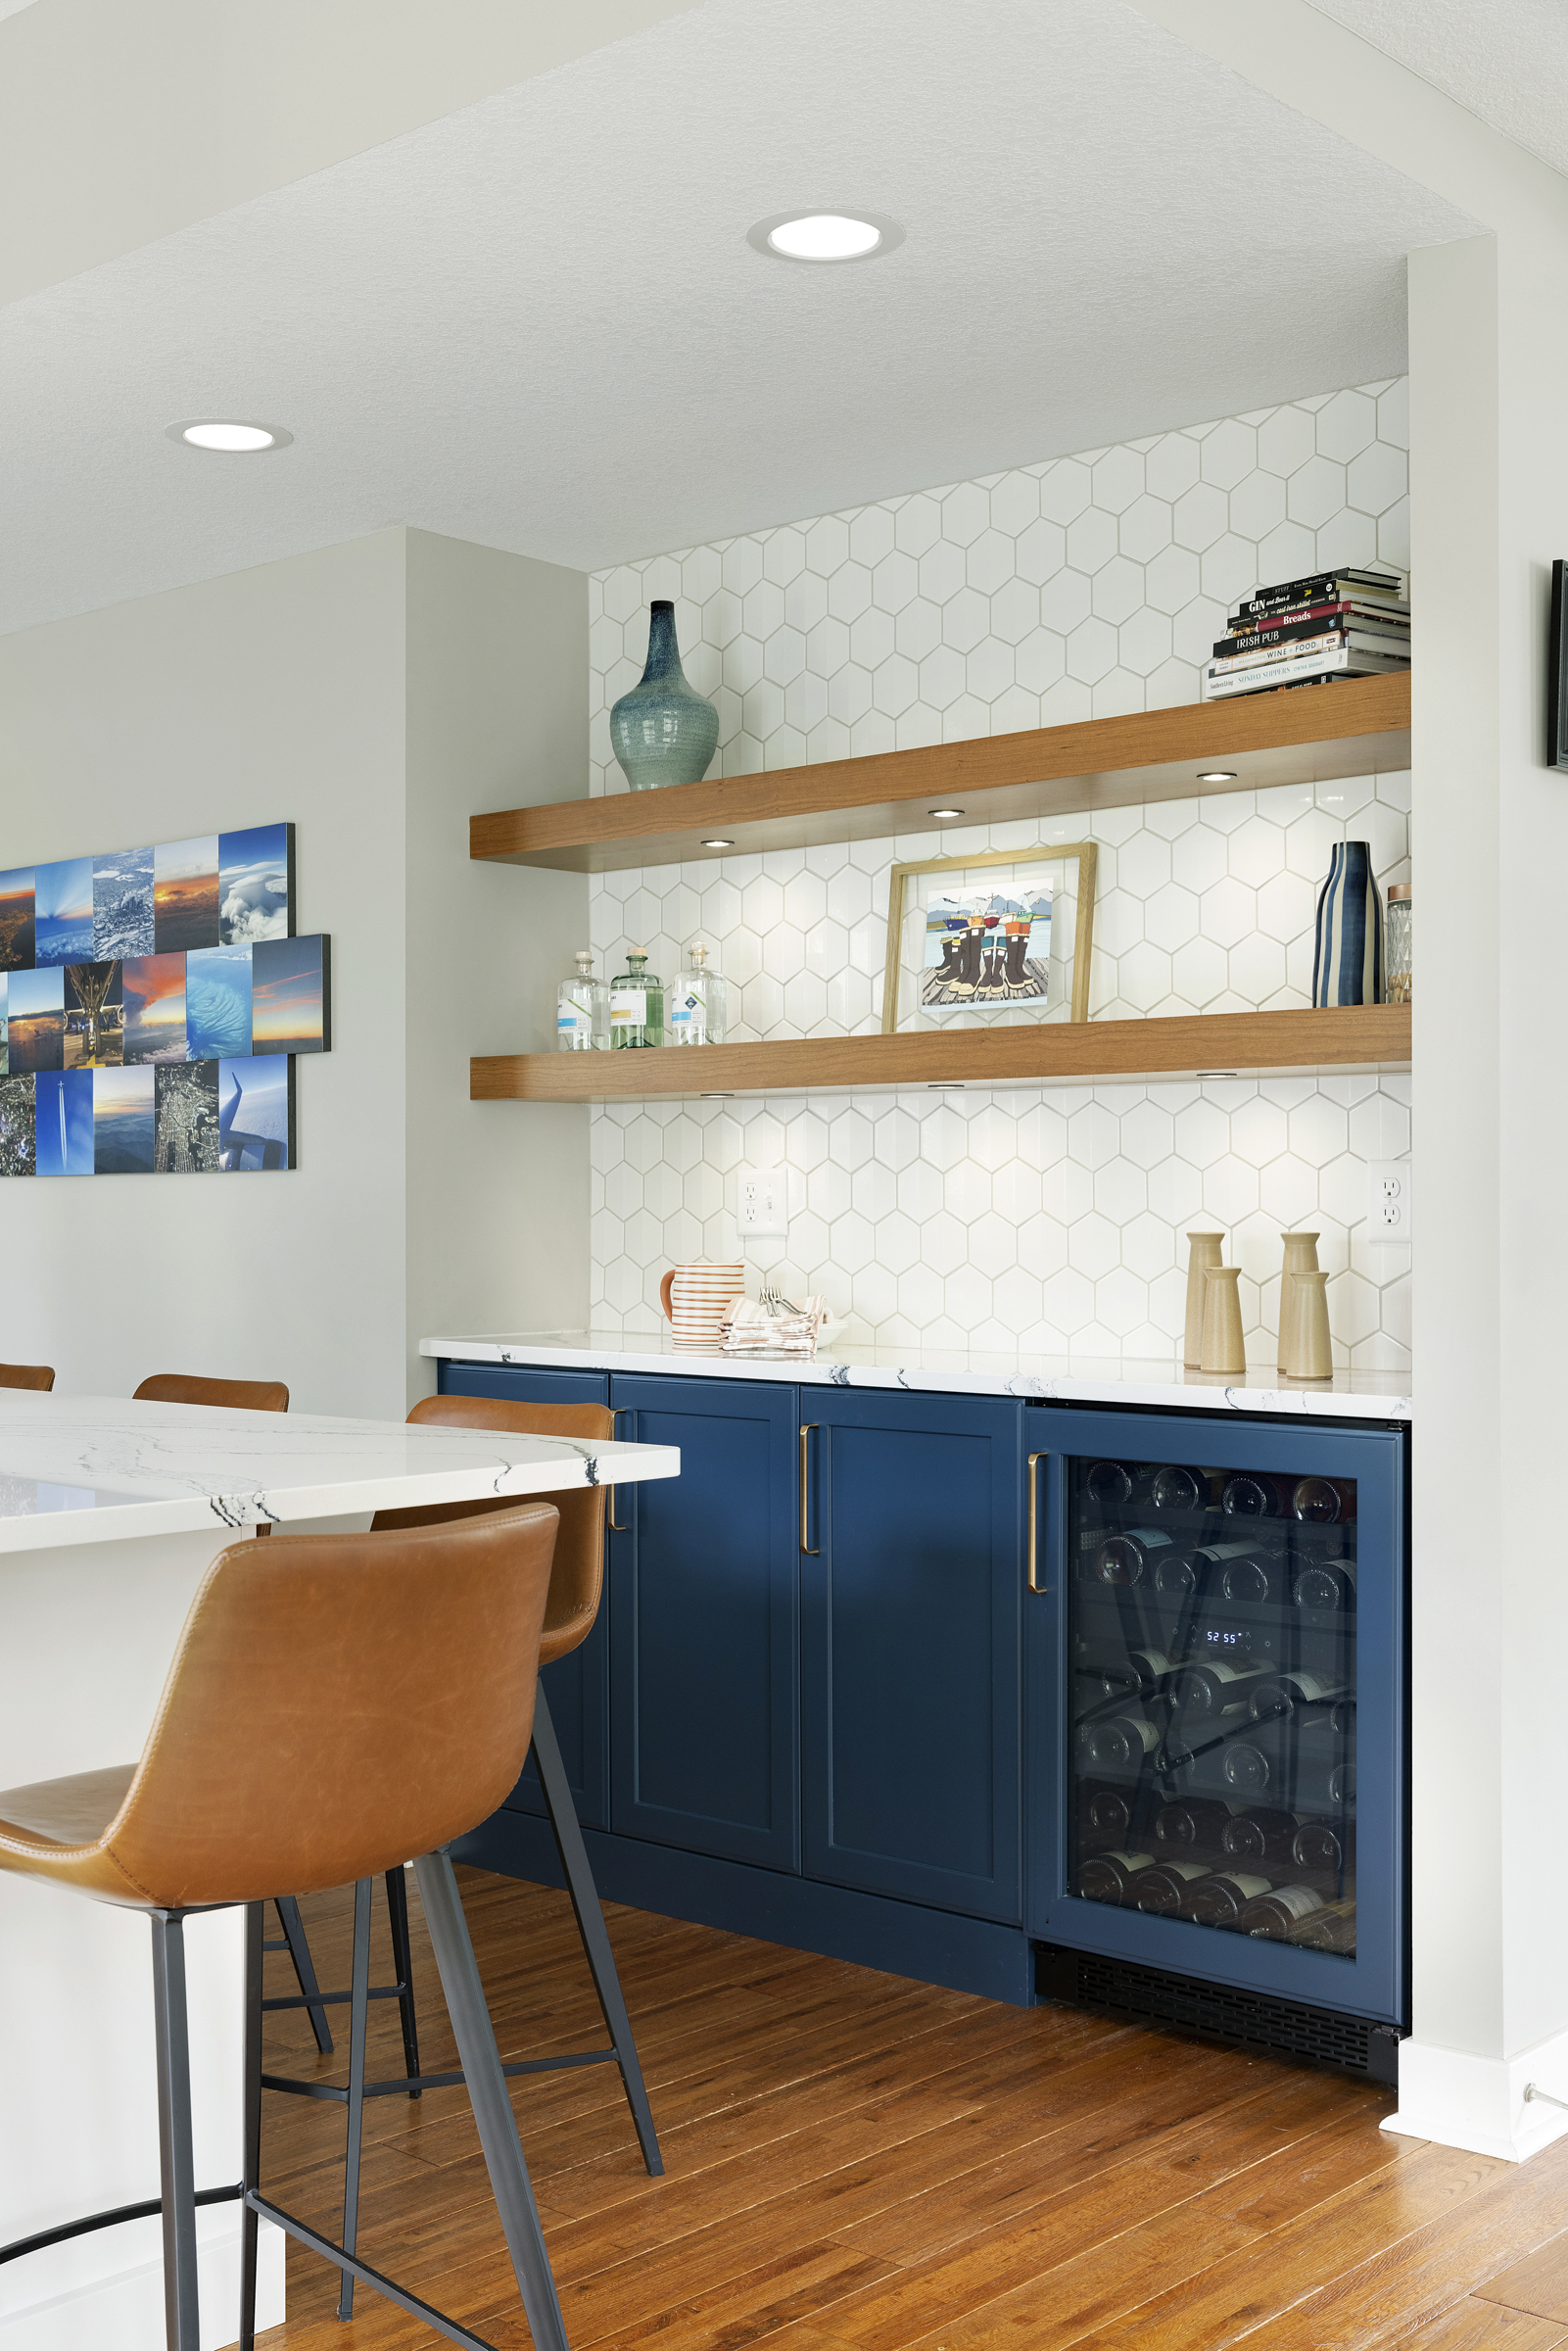 Kitchen remodel with blue base cabinets with built in wine fridge and floating wood shelves above